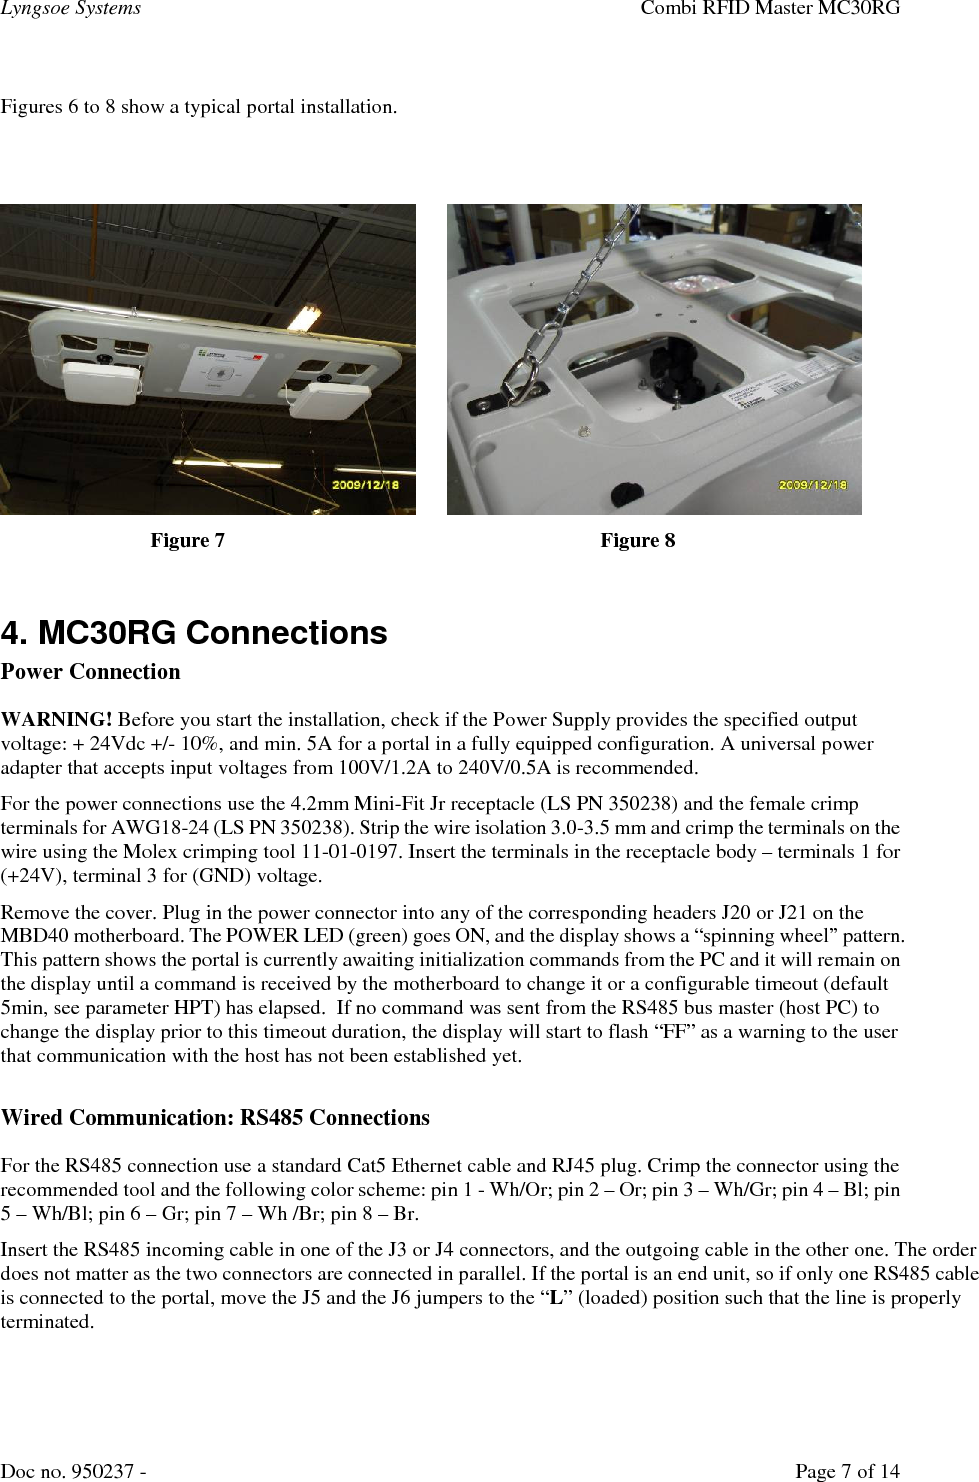 Lyngsoe Systems    Combi RFID Master MC30RG Doc no. 950237 -     Page 7 of 14  Figures 6 to 8 show a typical portal installation.                Figure 7           Figure 8  4. MC30RG Connections  Power Connection WARNING! Before you start the installation, check if the Power Supply provides the specified output voltage: + 24Vdc +/- 10%, and min. 5A for a portal in a fully equipped configuration. A universal power adapter that accepts input voltages from 100V/1.2A to 240V/0.5A is recommended. For the power connections use the 4.2mm Mini-Fit Jr receptacle (LS PN 350238) and the female crimp terminals for AWG18-24 (LS PN 350238). Strip the wire isolation 3.0-3.5 mm and crimp the terminals on the wire using the Molex crimping tool 11-01-0197. Insert the terminals in the receptacle body – terminals 1 for (+24V), terminal 3 for (GND) voltage. Remove the cover. Plug in the power connector into any of the corresponding headers J20 or J21 on the MBD40 motherboard. The POWER LED (green) goes ON, and the display shows a “spinning wheel” pattern. This pattern shows the portal is currently awaiting initialization commands from the PC and it will remain on the display until a command is received by the motherboard to change it or a configurable timeout (default 5min, see parameter HPT) has elapsed.  If no command was sent from the RS485 bus master (host PC) to change the display prior to this timeout duration, the display will start to flash “FF” as a warning to the user that communication with the host has not been established yet.  Wired Communication: RS485 Connections  For the RS485 connection use a standard Cat5 Ethernet cable and RJ45 plug. Crimp the connector using the recommended tool and the following color scheme: pin 1 - Wh/Or; pin 2 – Or; pin 3 – Wh/Gr; pin 4 – Bl; pin 5 – Wh/Bl; pin 6 – Gr; pin 7 – Wh /Br; pin 8 – Br.  Insert the RS485 incoming cable in one of the J3 or J4 connectors, and the outgoing cable in the other one. The order does not matter as the two connectors are connected in parallel. If the portal is an end unit, so if only one RS485 cable is connected to the portal, move the J5 and the J6 jumpers to the “L” (loaded) position such that the line is properly terminated. 